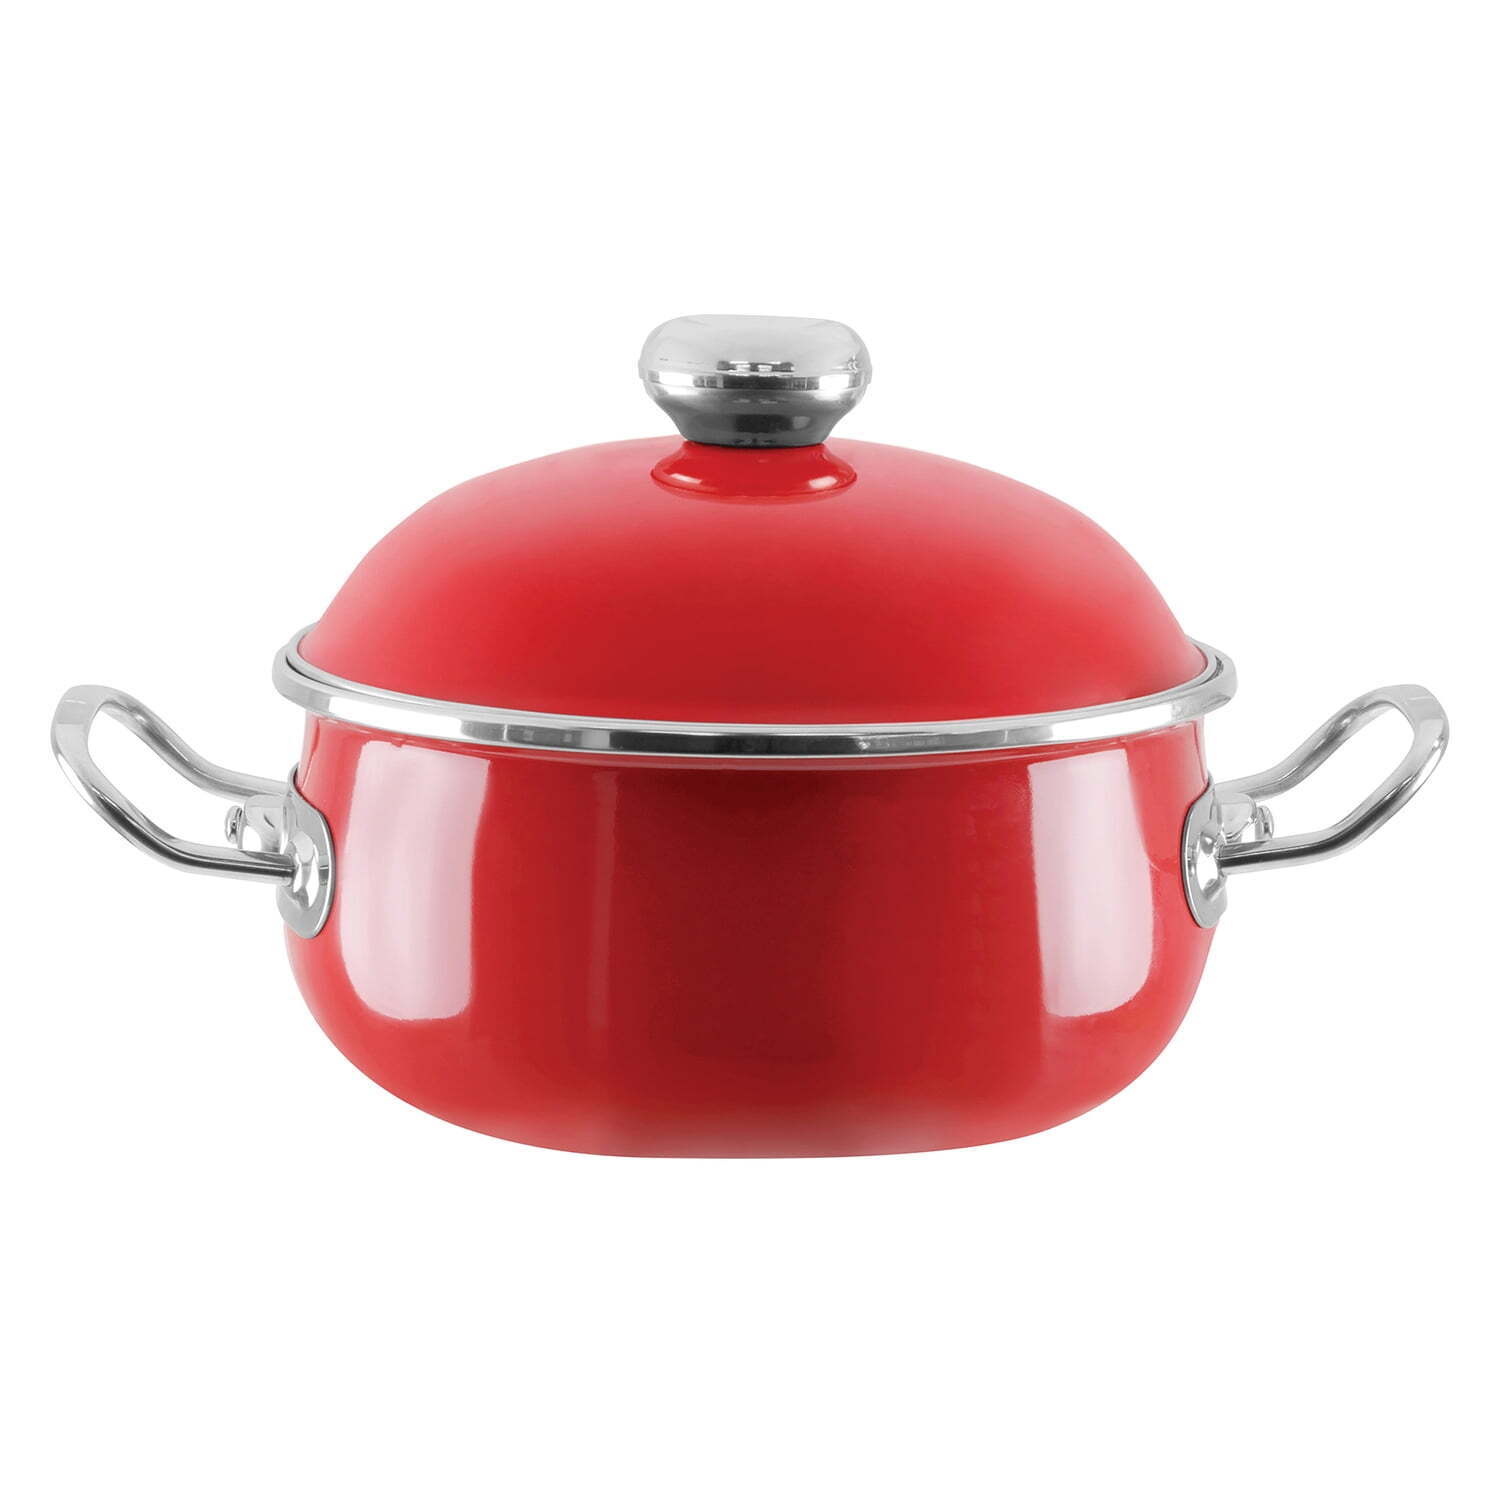 Enamel-on-Steel Covered Dutch Oven (3.5-Qt., Red) ,